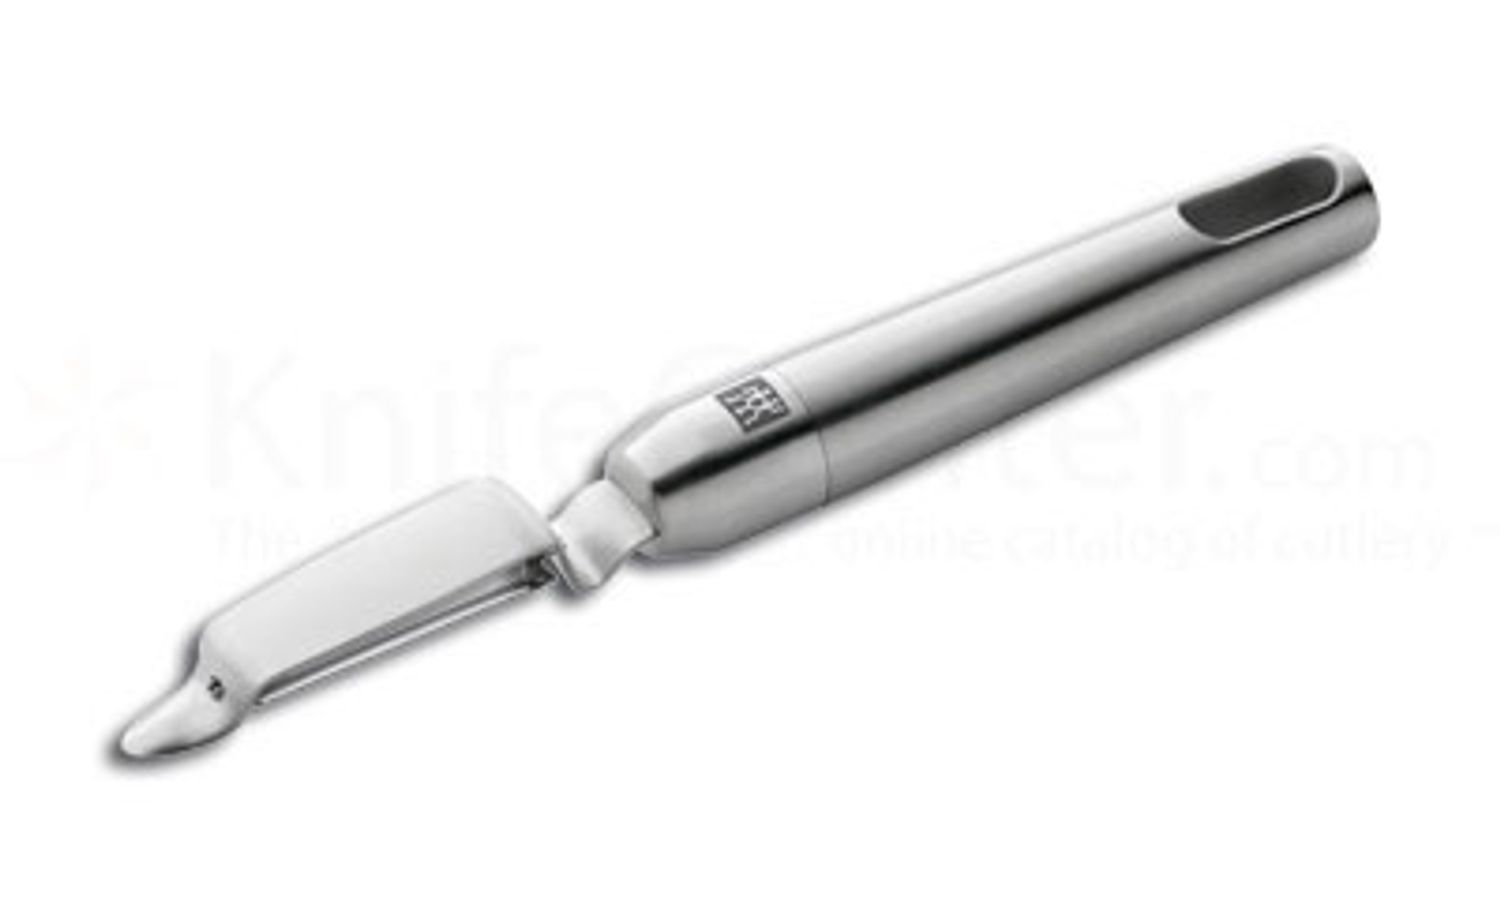 Zwilling J.A. Henckels TWIN Pure Gadgets Swivel Peeler - KnifeCenter -  37502-000 - Discontinued